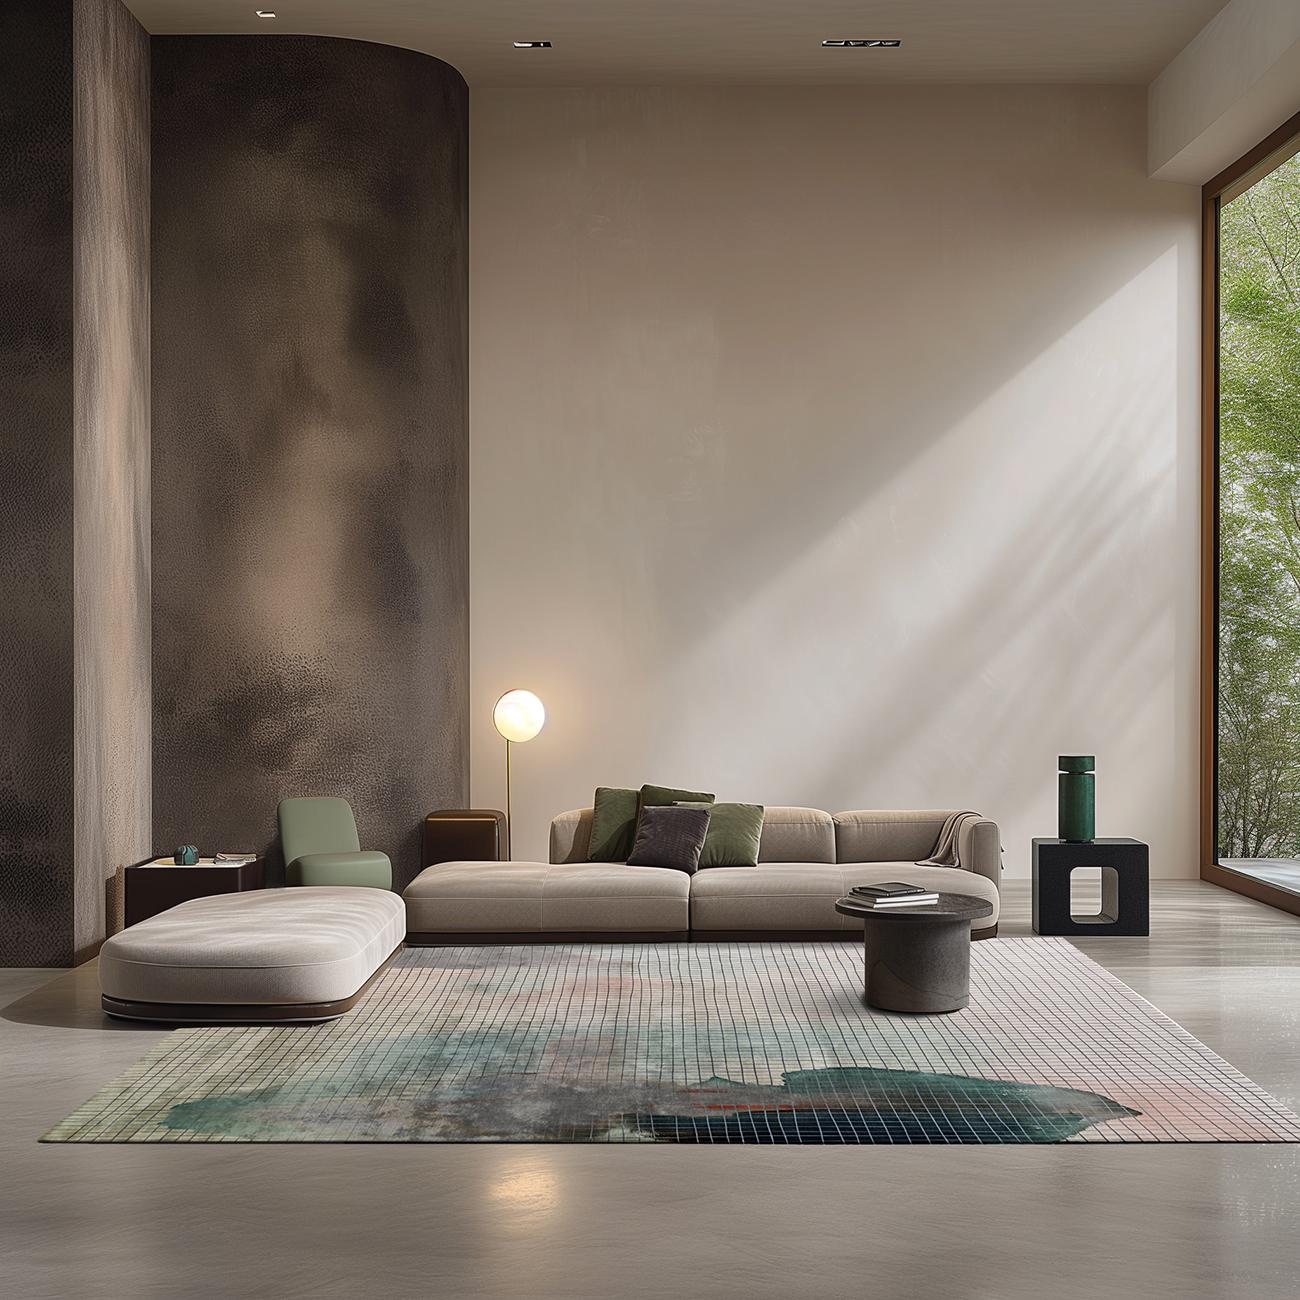 Épernay, Le Dessin #122, Deja Vu Edit Rug by Atelier Bowy C.D.
Dimensions: W 243 x L 300 cm
Materials: Wool, silk.

Available in W170 x L215, W190 x L235, W210 x L245, W243 x L300 cm.

Atelier Bowy C.D. is dedicated to crafting contemporary handmade